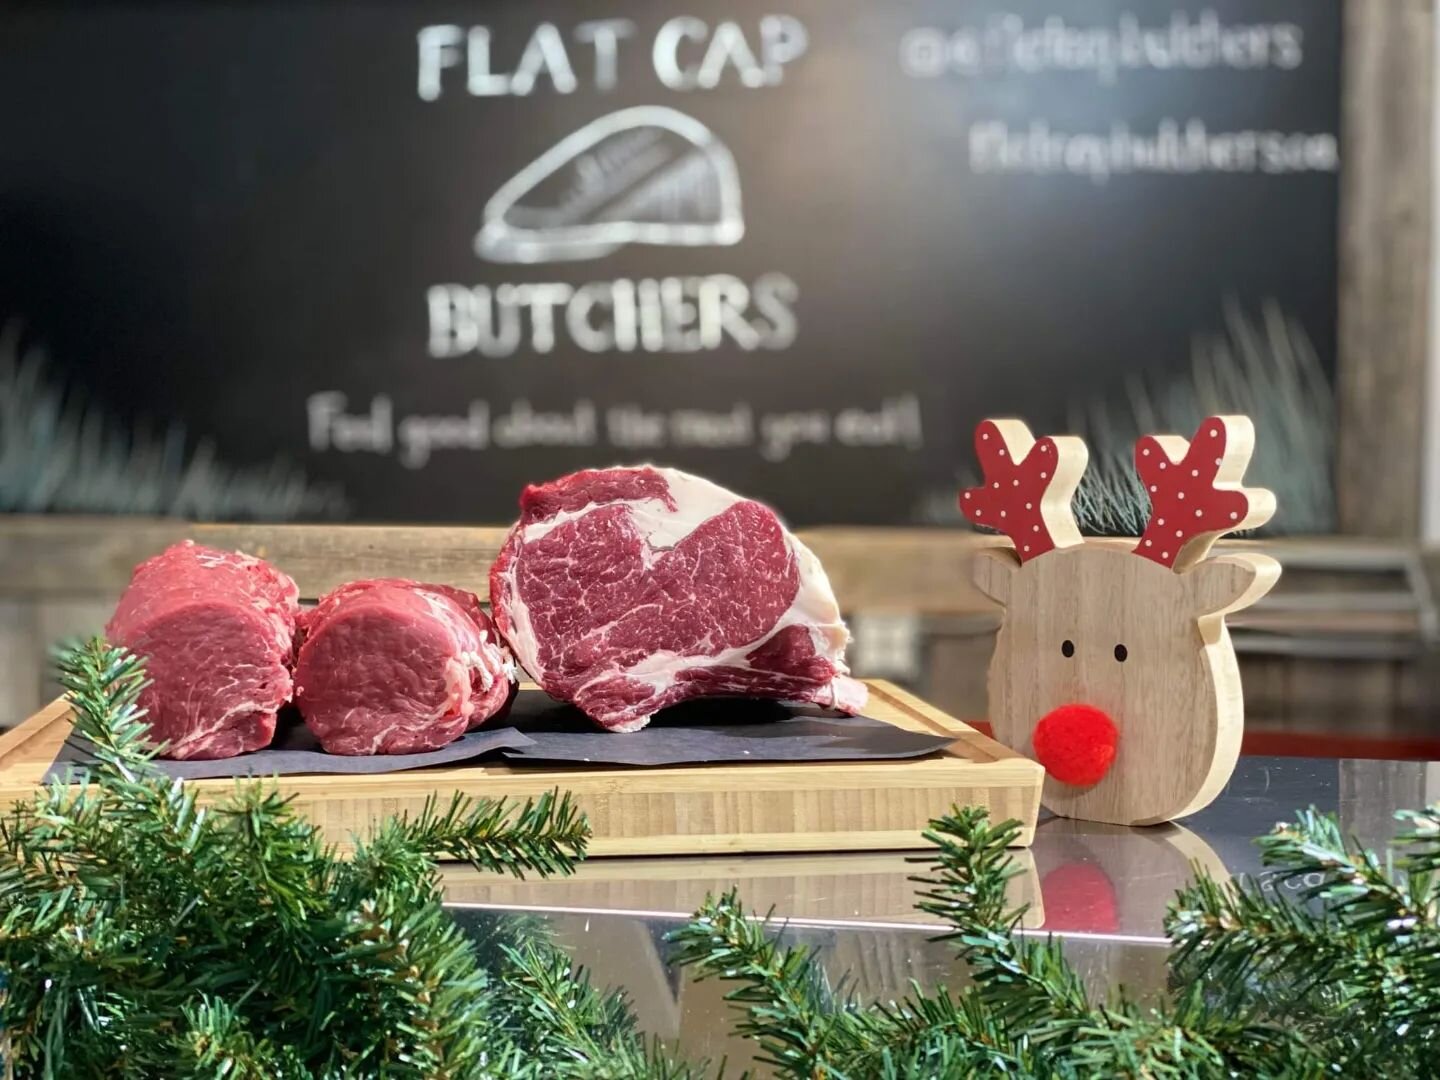 This week (November 24th to 27th) we have tenderloin and prime rib on sale for 15% off! Also don't forget we are taking orders for the holidays! We sell out quick so put your name down. 

#yyc #yyceats #butchersofinstagram #grassfinishedbeef #christm